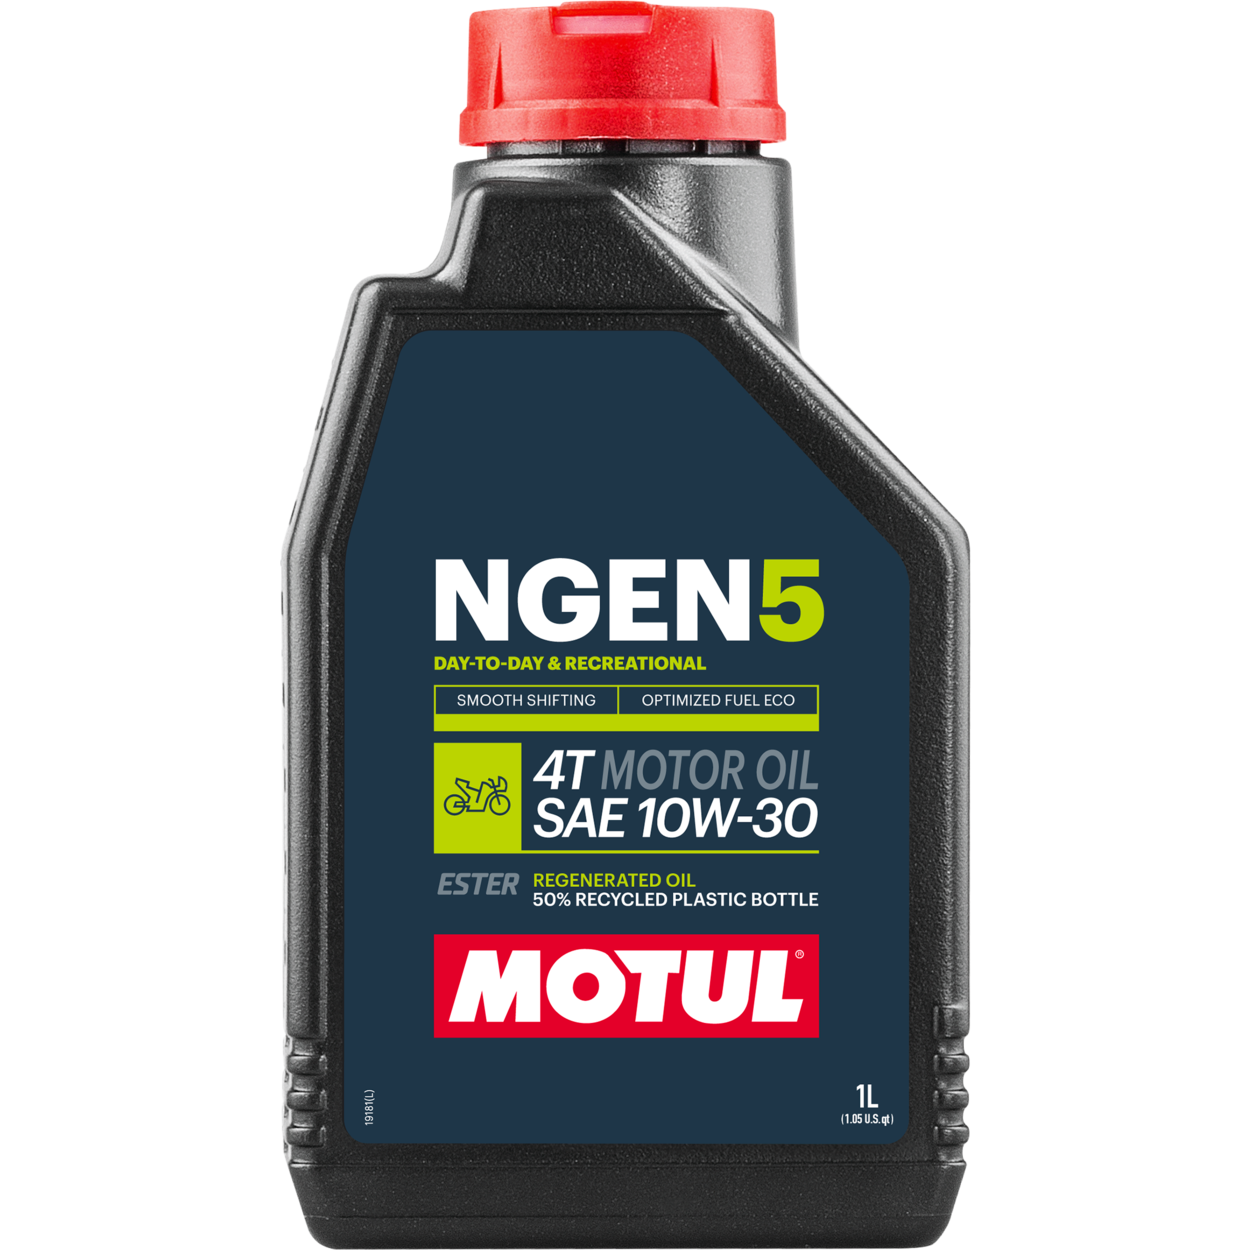 111817-1 MOTUL NGEN 5 10W-30 4T is an innovative, sustainable motor oil based on a combination of finest base oils and additives blended with synthetic esters and high quality regenerated oils.